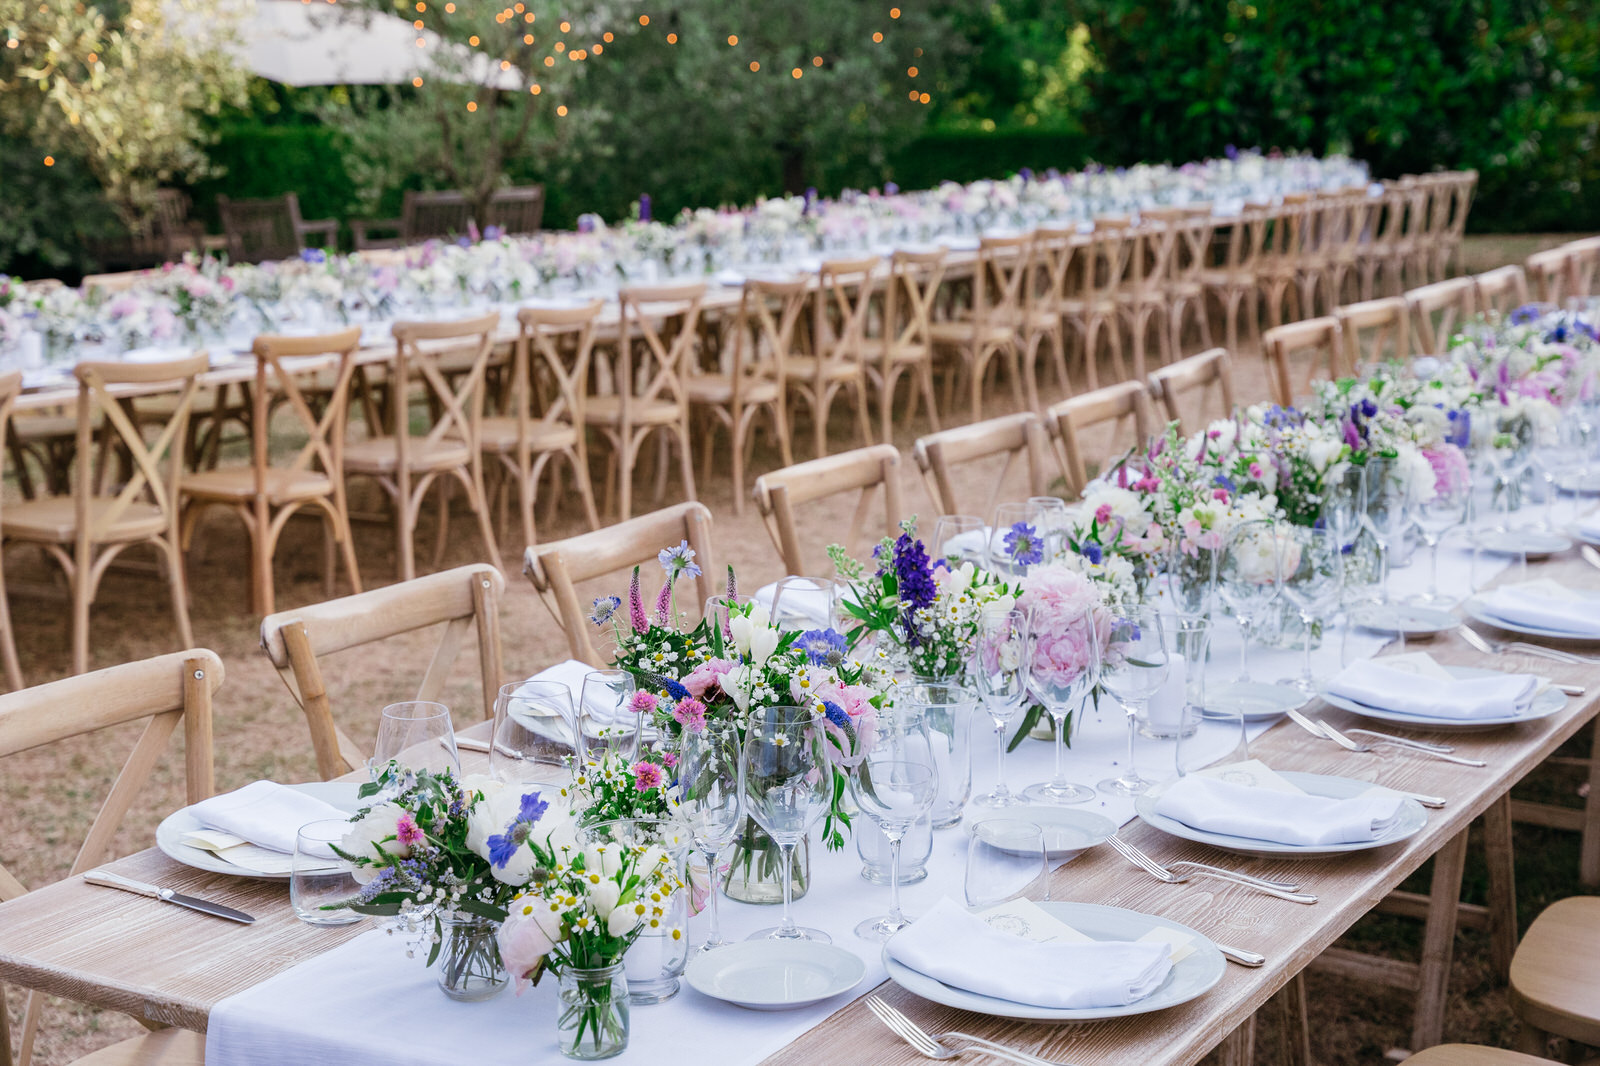 Colorful Summer Tuscan Wedding with Fragrant Floral Tablescapes